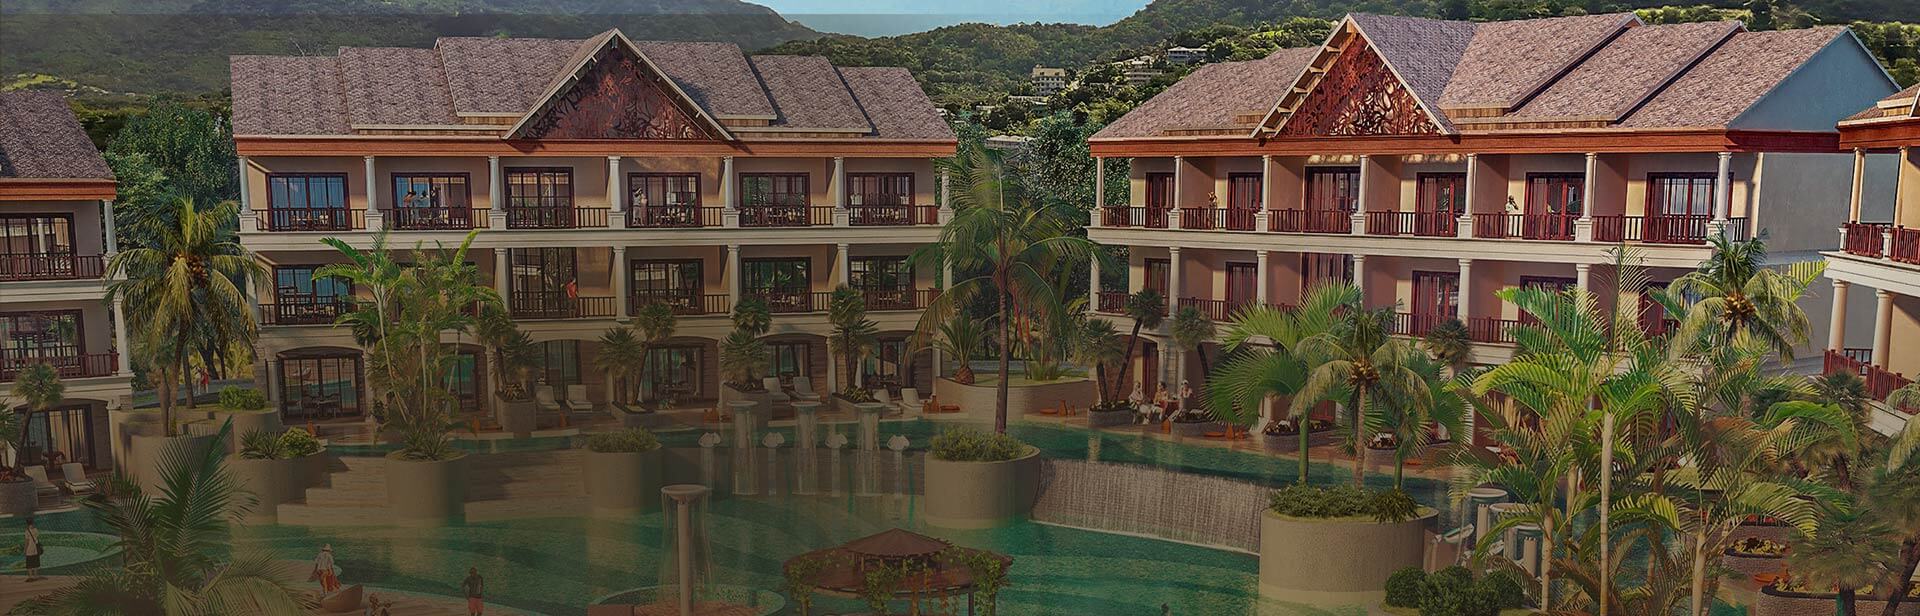 Dominica Real Estate: An Autograph Collection Hotel